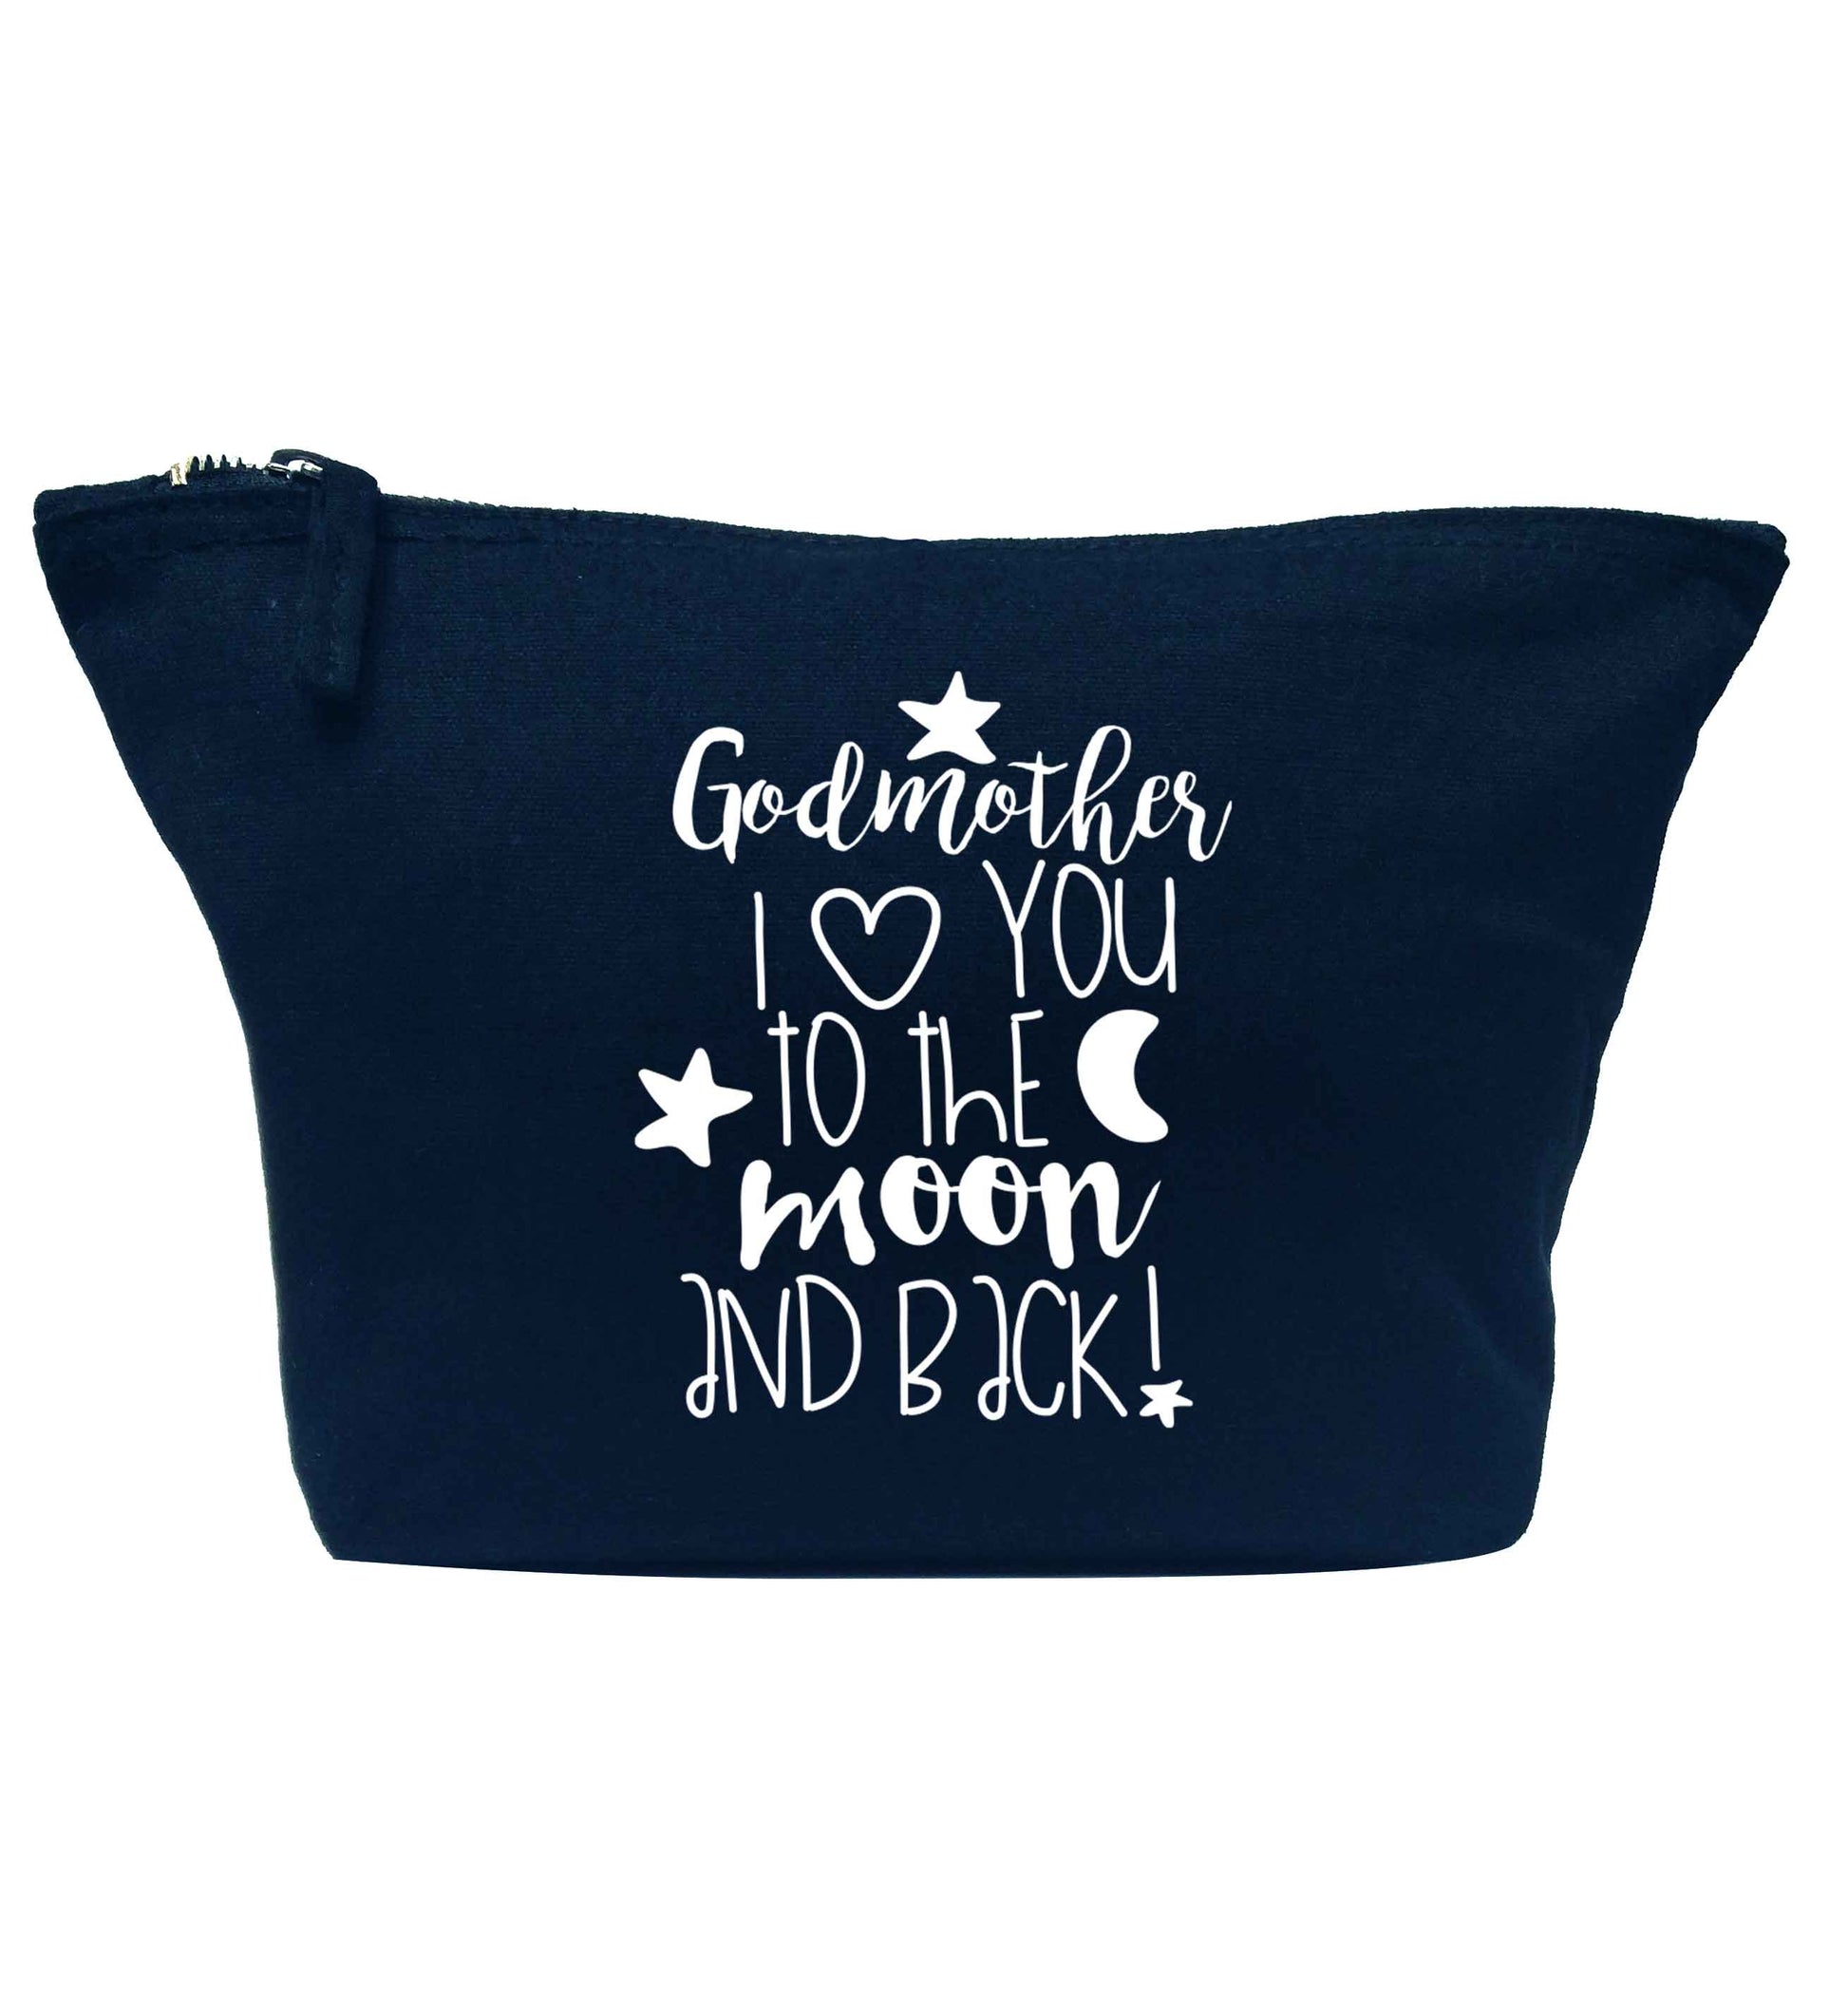 Godmother I love you to the moon and back navy makeup bag